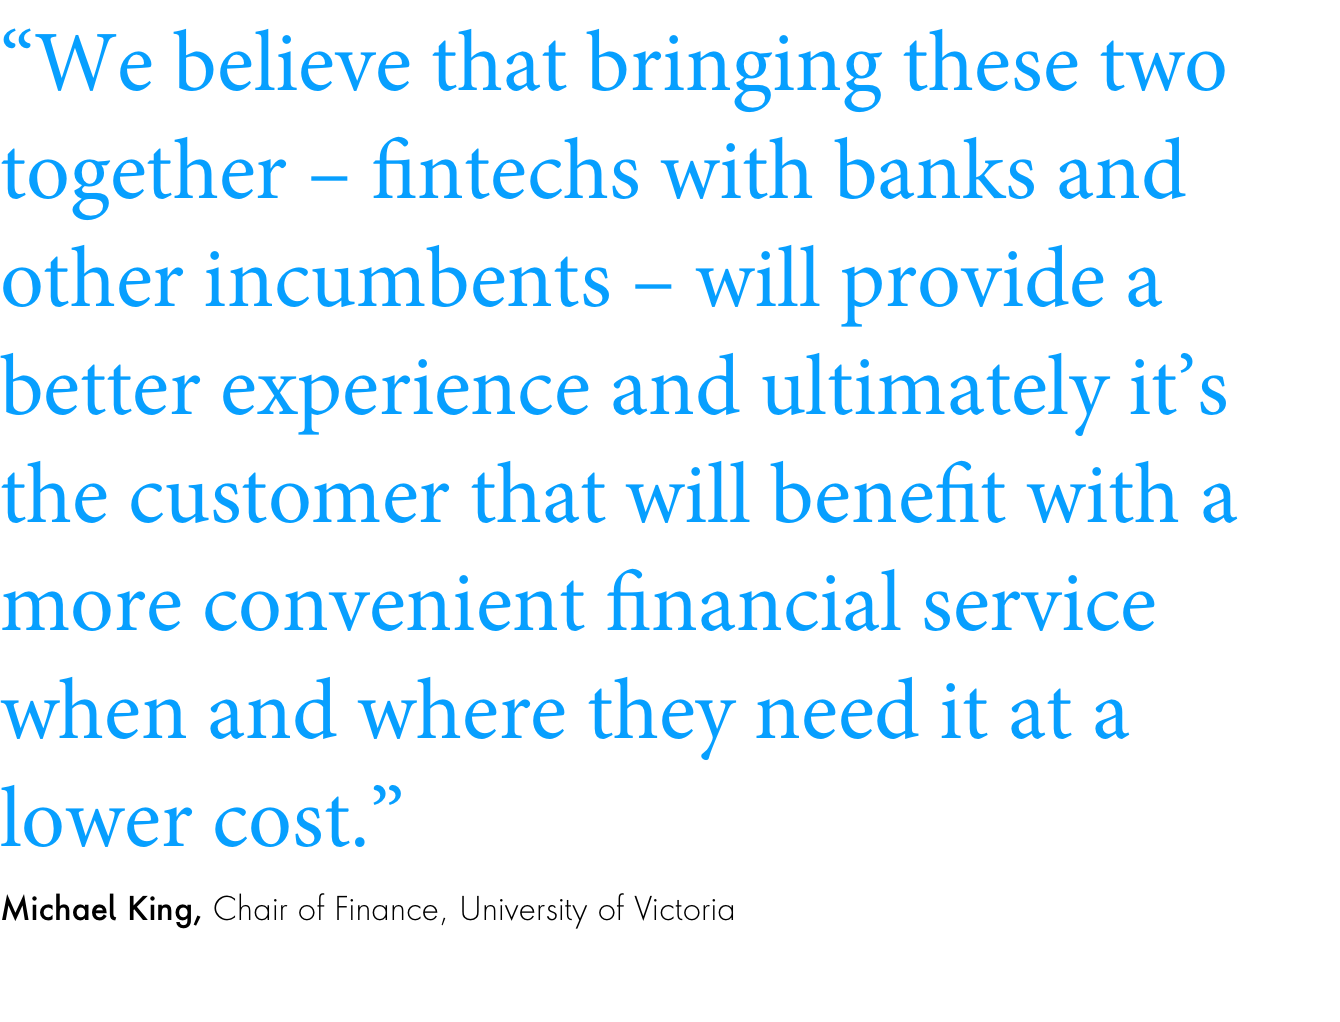 Quote: “We believe that bringing these two together – fintechs with banks and other incumbents – will provide a better experience and ultimately it’s the customer that will benefit with a more convenient financial service when and where they need it at a lower cost.”Michael King, Chair of Finance, University of Victoria